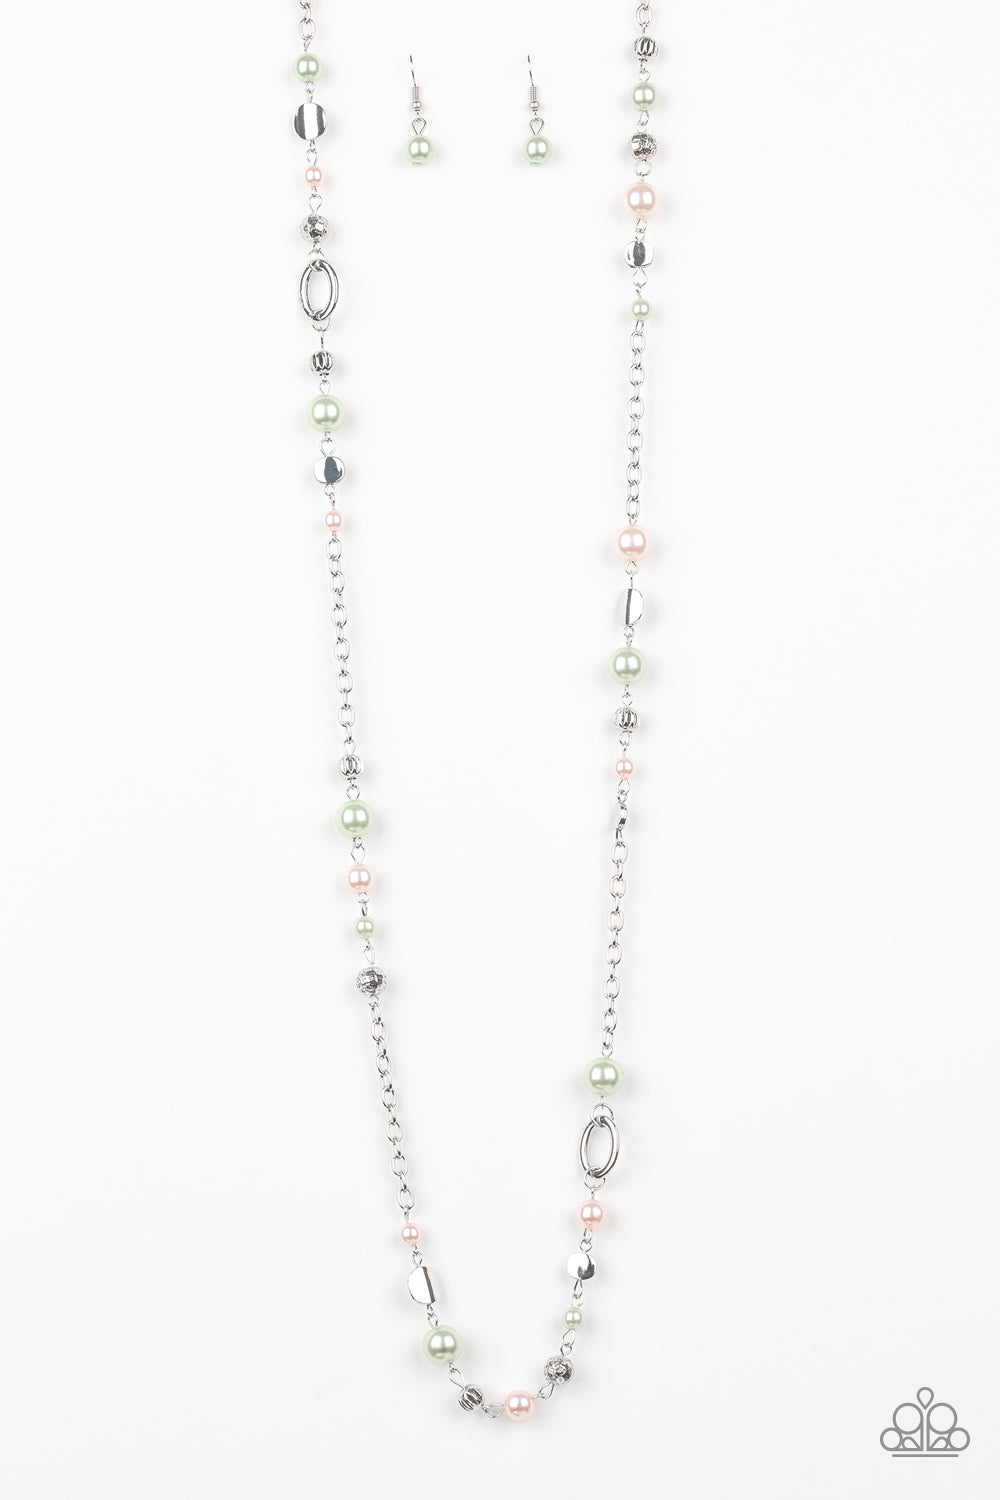 Paparazzi - Make An Appearance - Multicolored Necklace